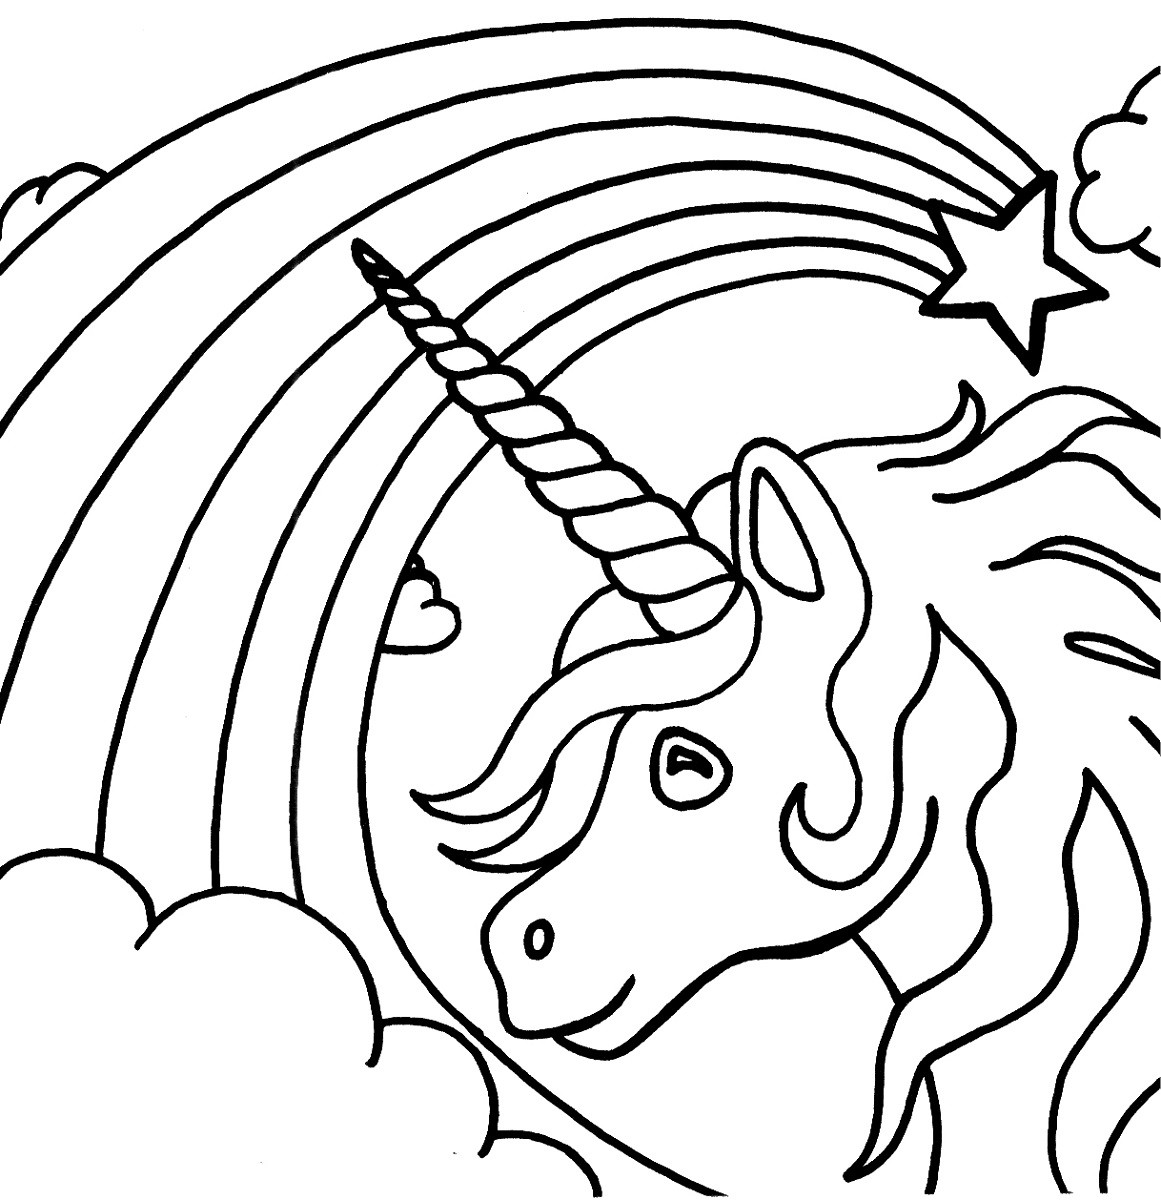 Download Coloring Pages Of Cute Unicorns at GetColorings.com | Free printable colorings pages to print ...